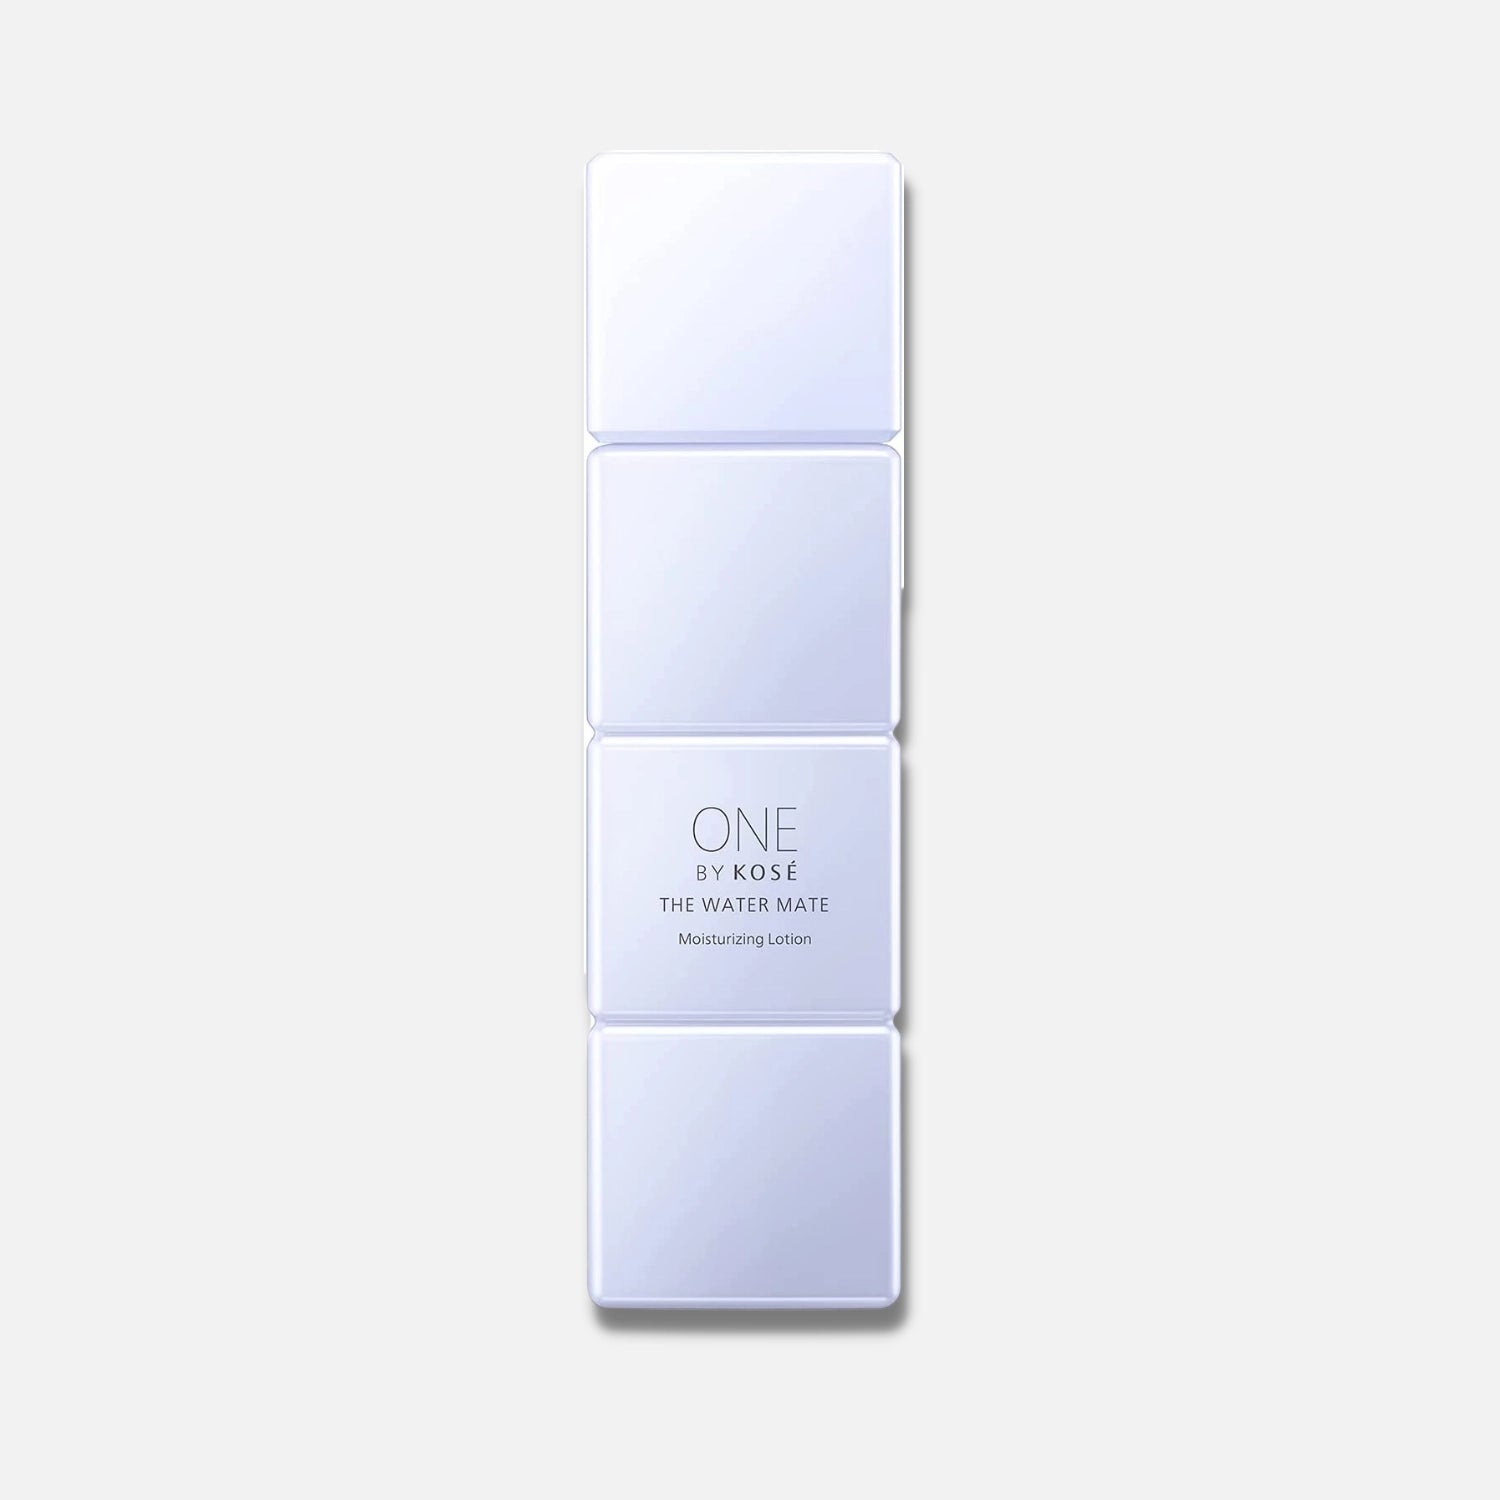 One by Kose The Water Mate Moisturizing Lotion 160ml - Buy Me Japan